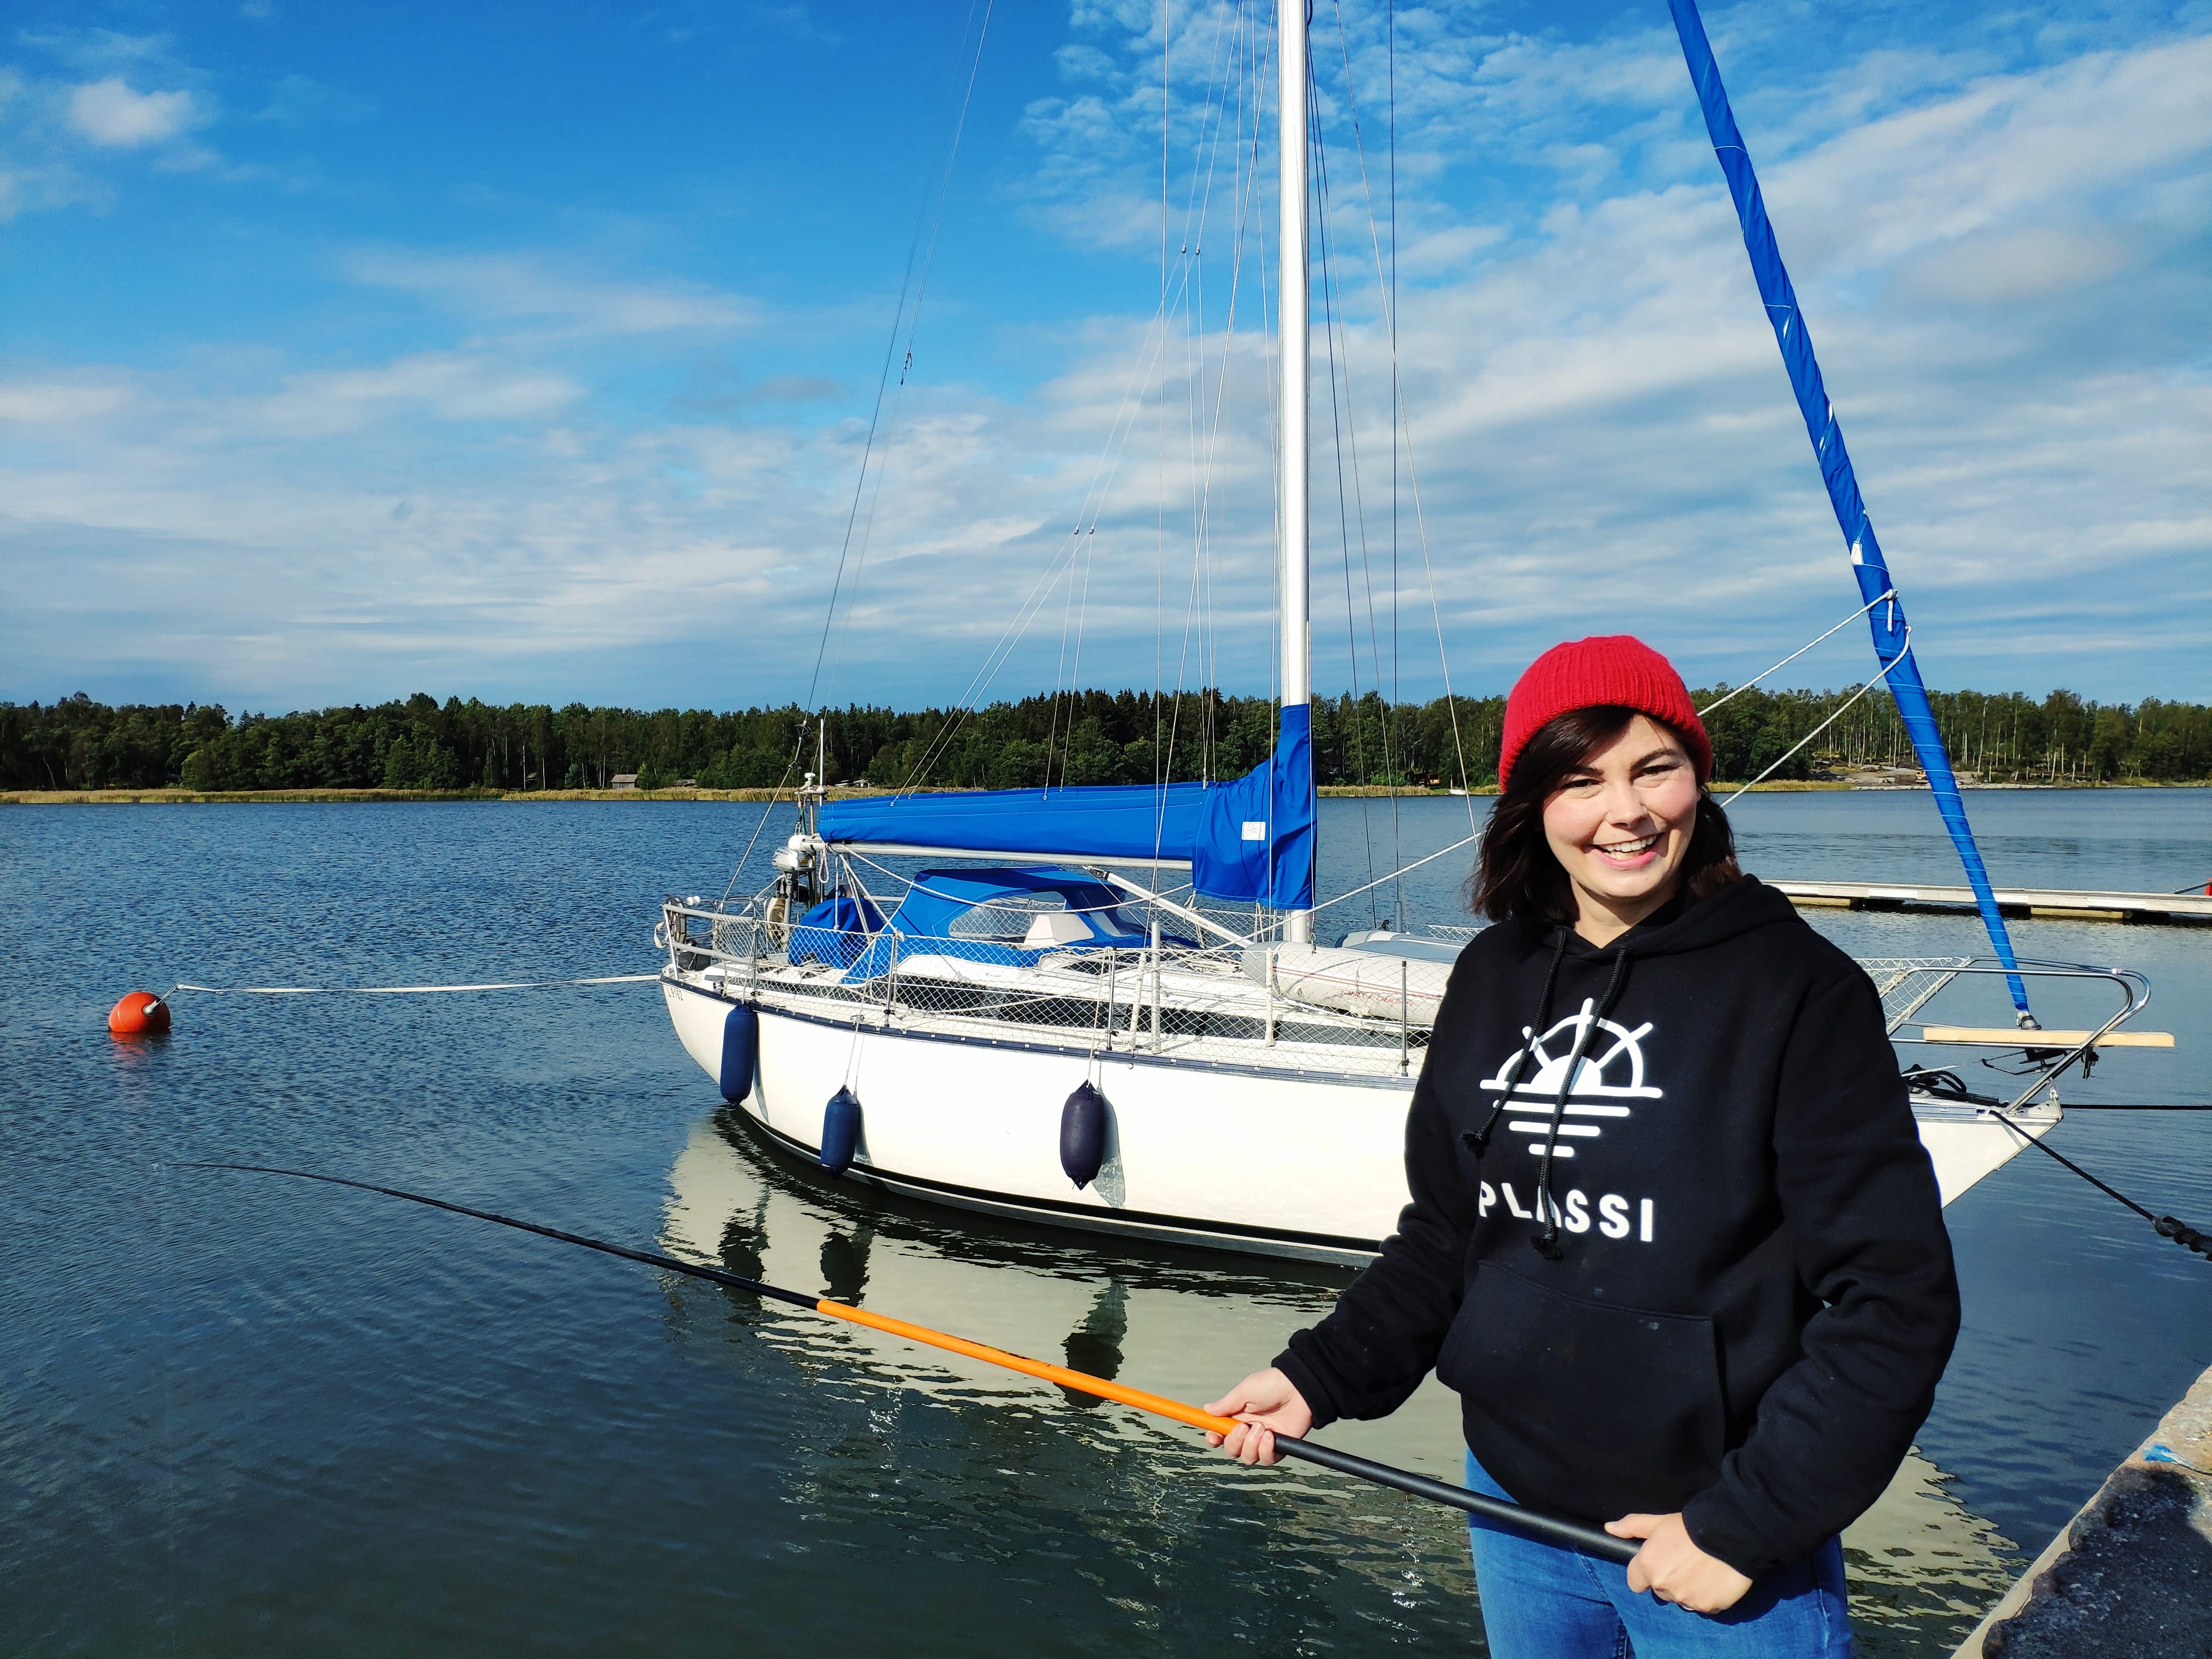 Young woman posing with a fishing rod. In the background is a sailboat.